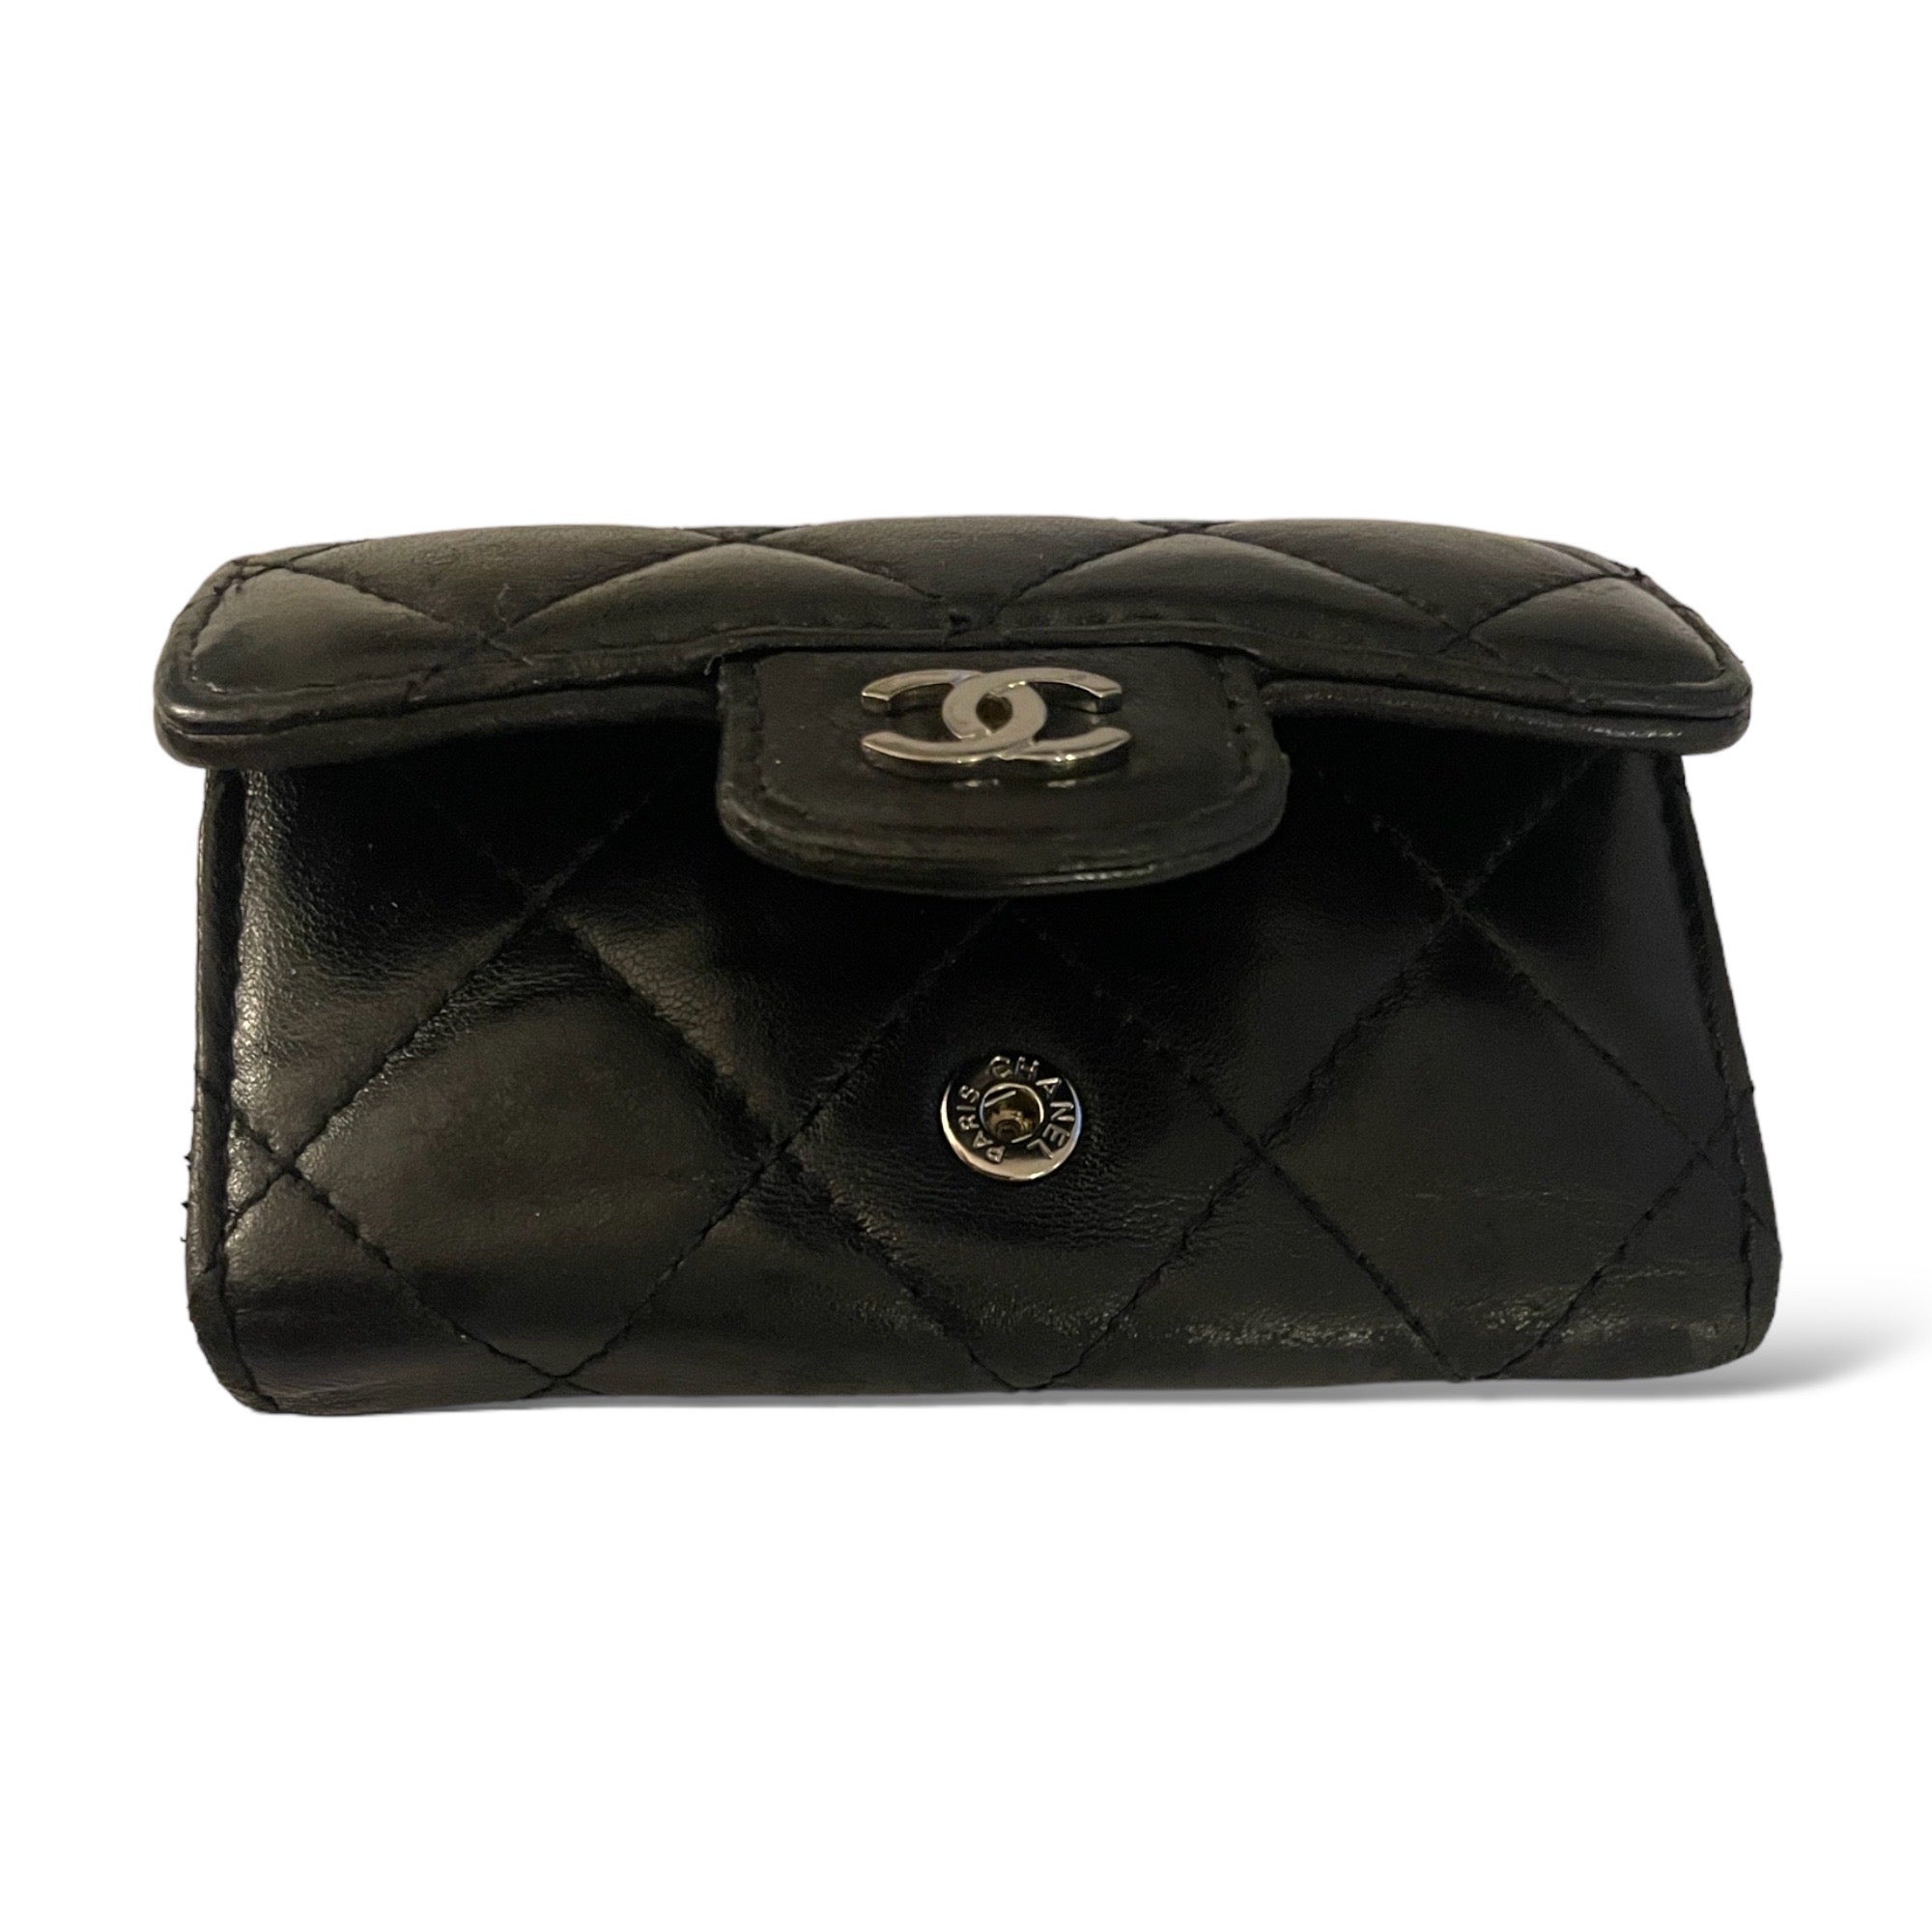 CHANEL Vintage Key & Card Holder in Quilted Black Leather